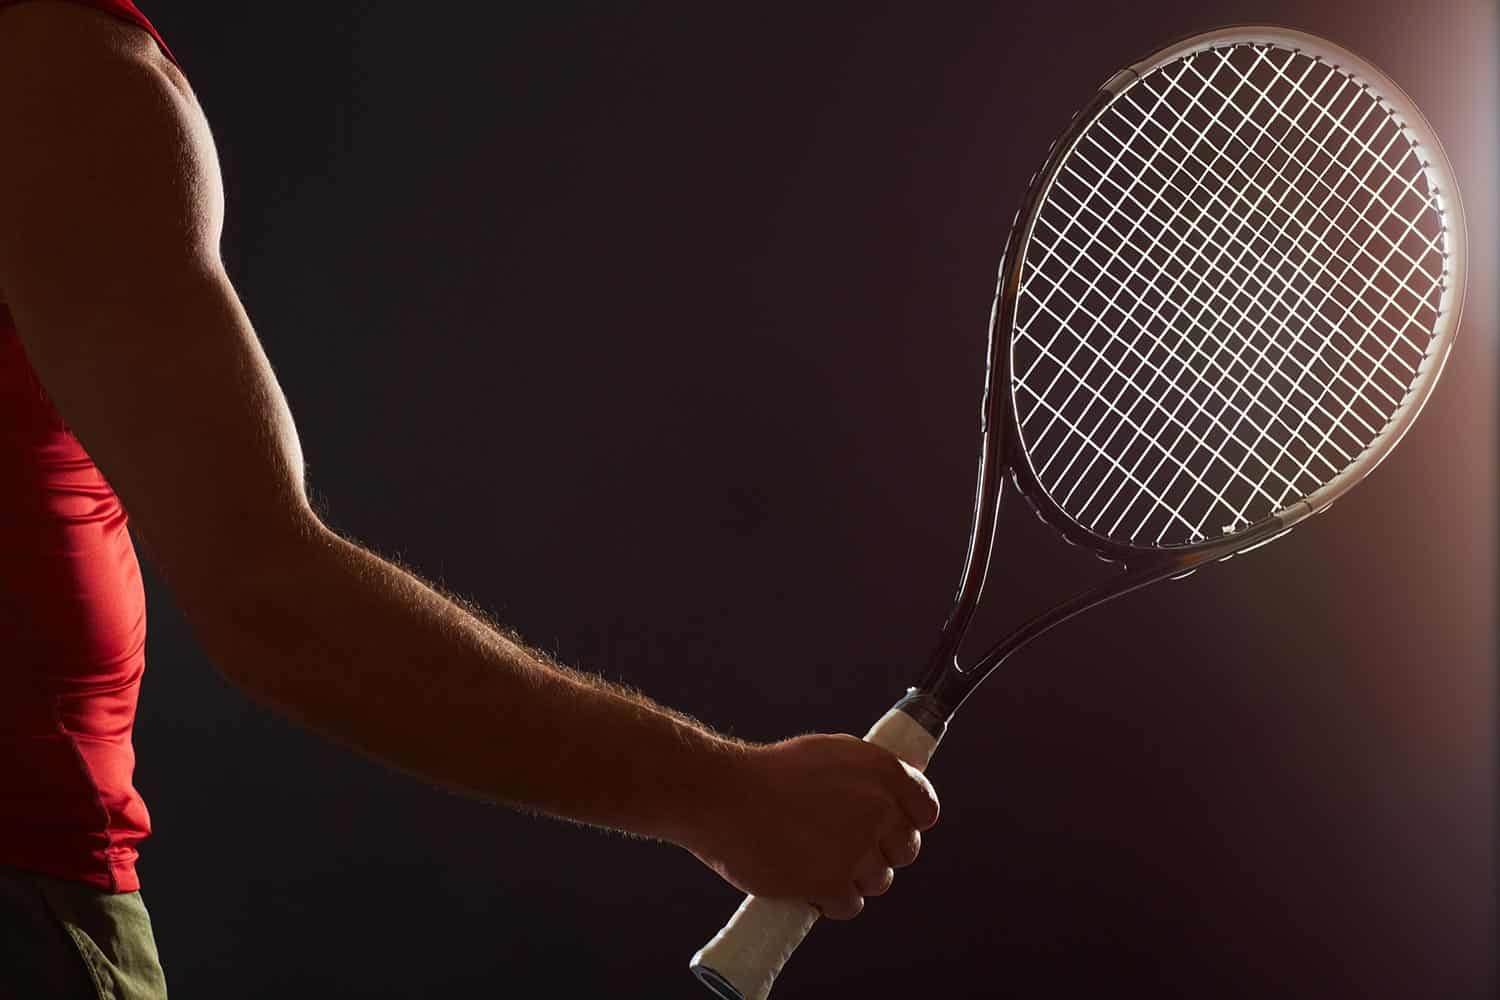 Tennis player's arm and hand holding a tennis racket